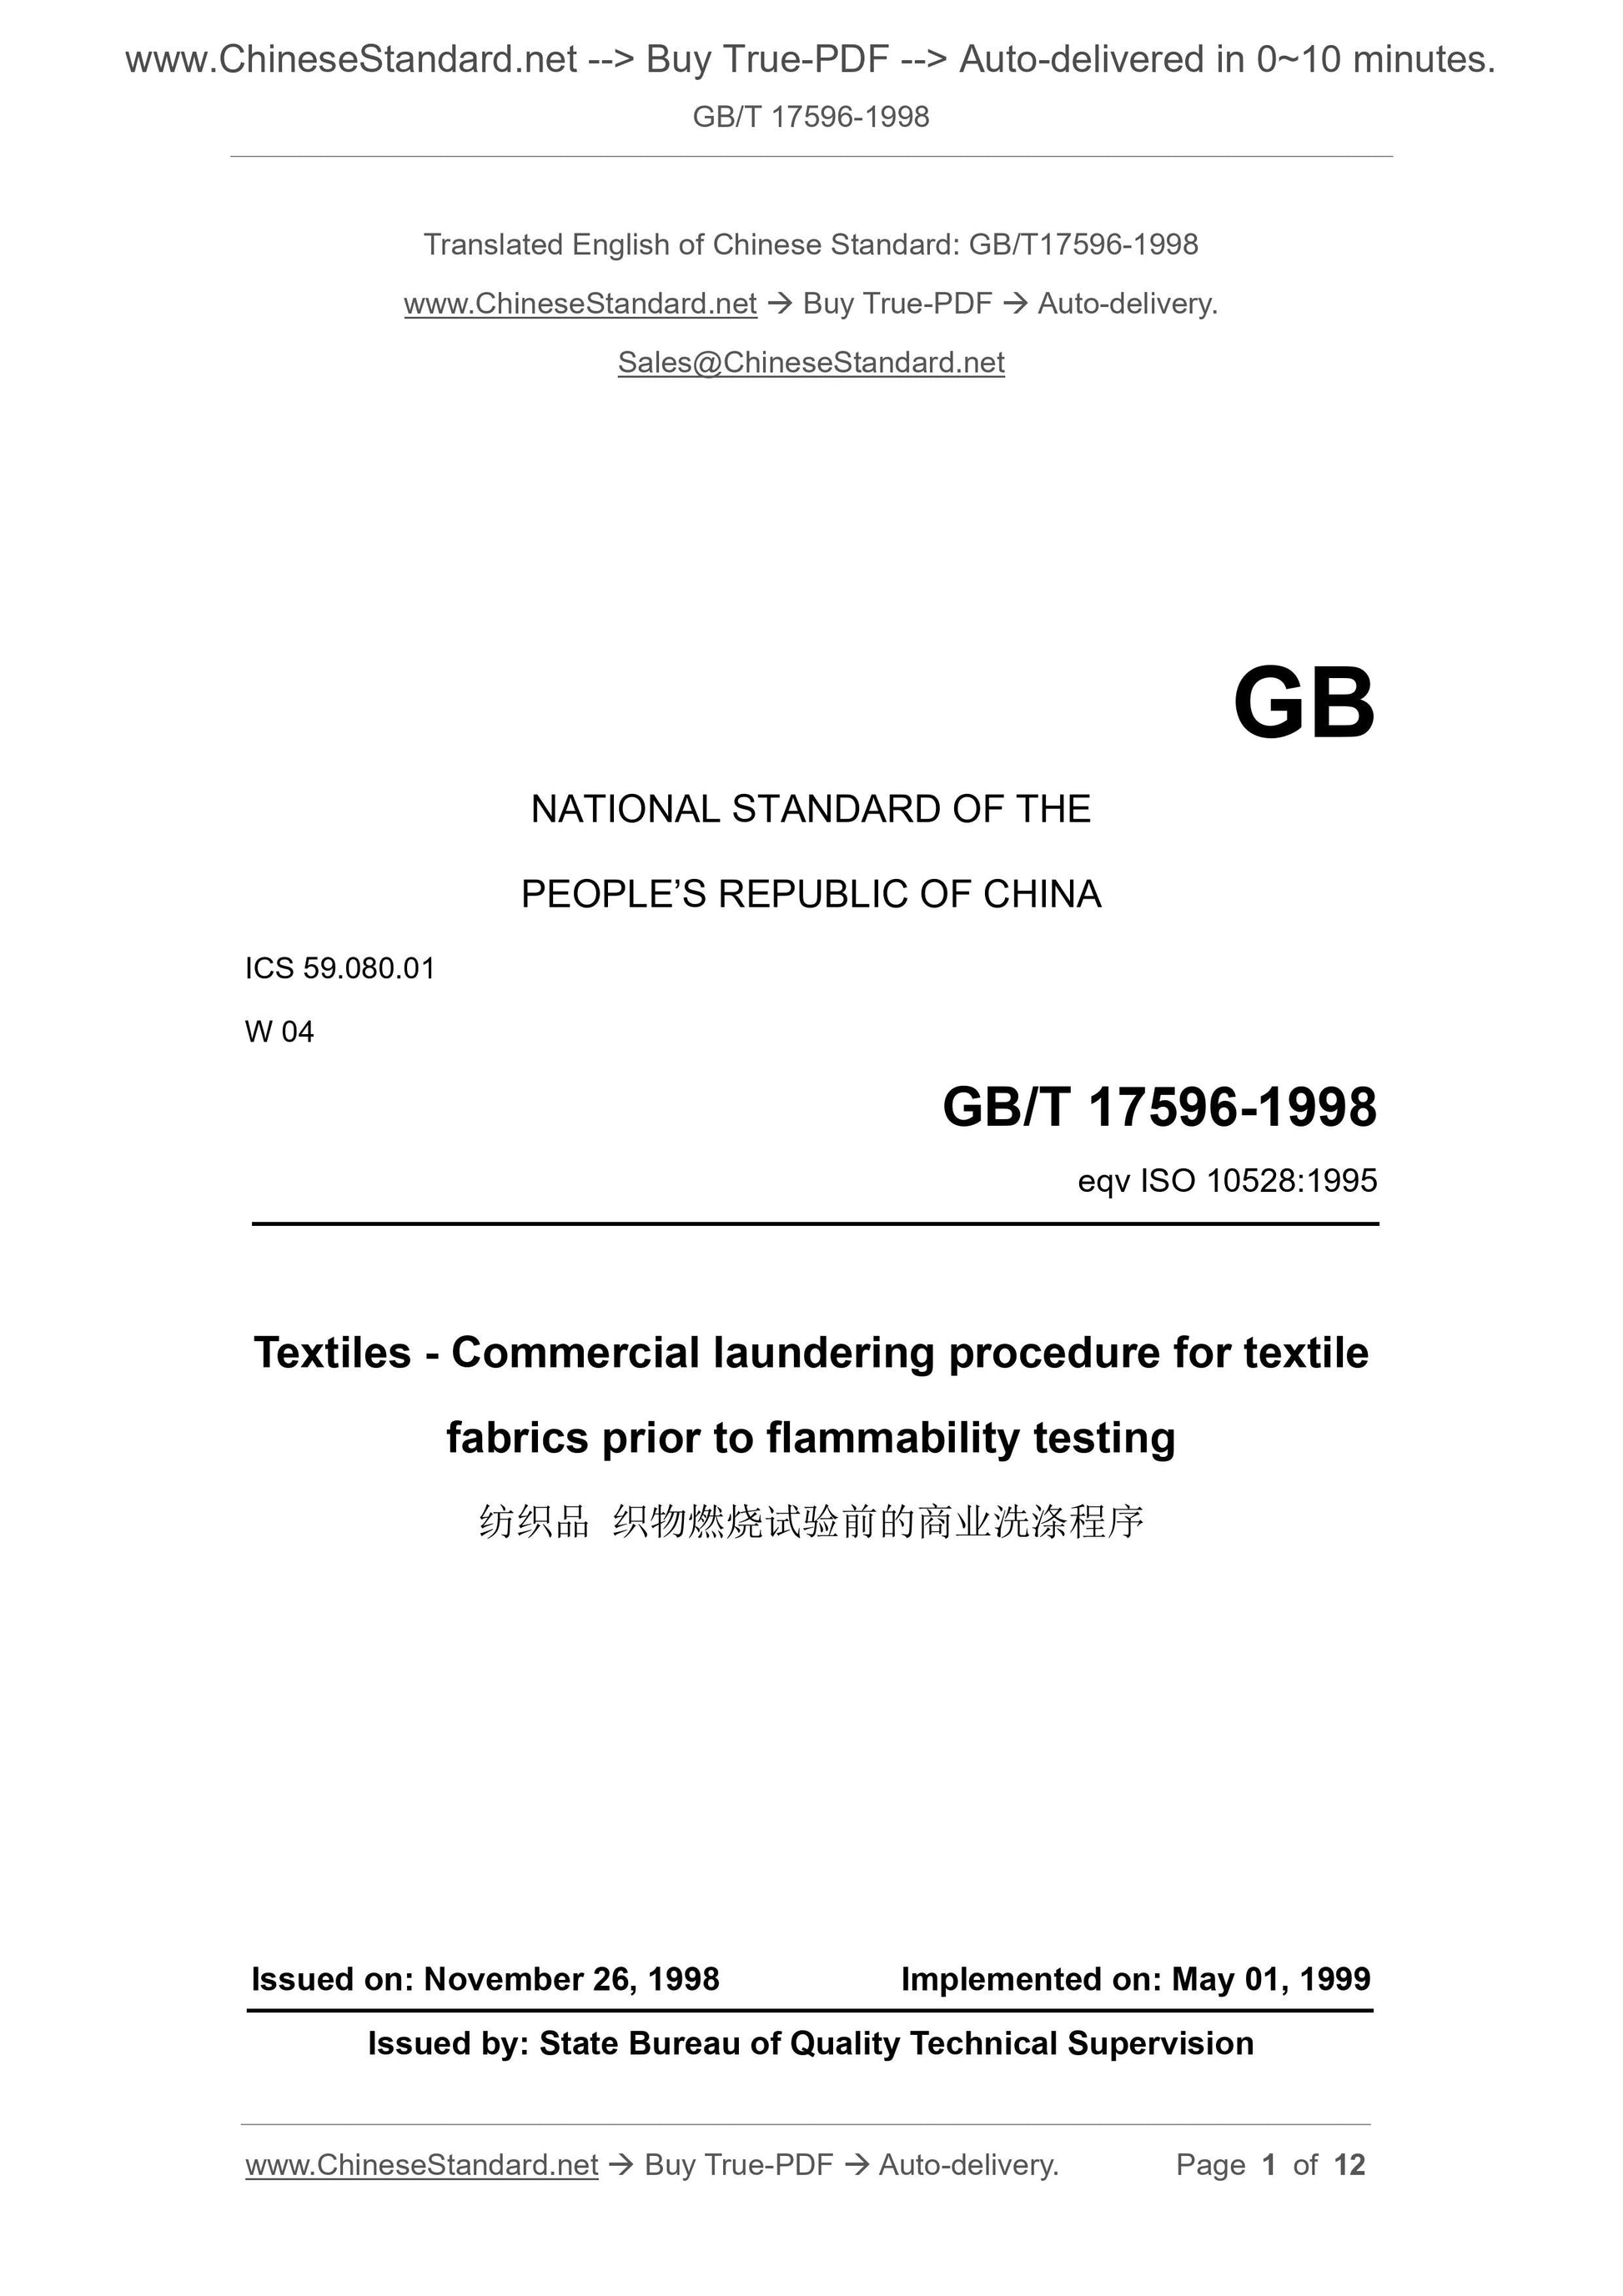 GB/T 17596-1998 Page 1